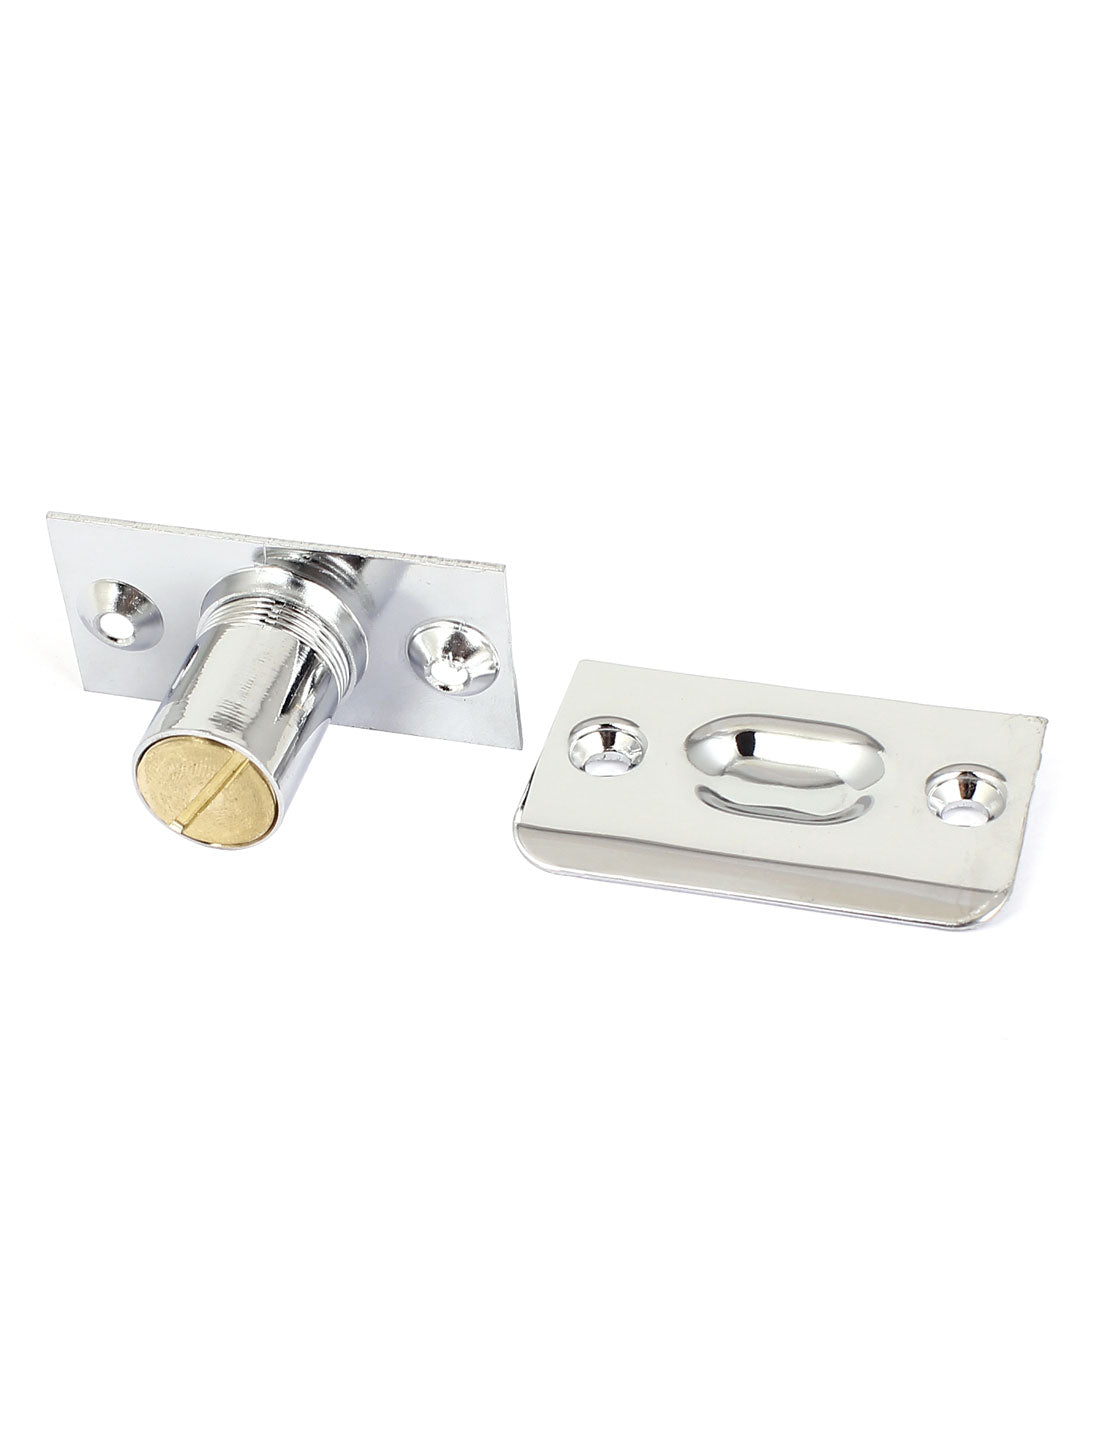 uxcell Uxcell 18mm Dia Threaded Bales Catch Ball Mortice Door Cupboard Spring Roller Latch